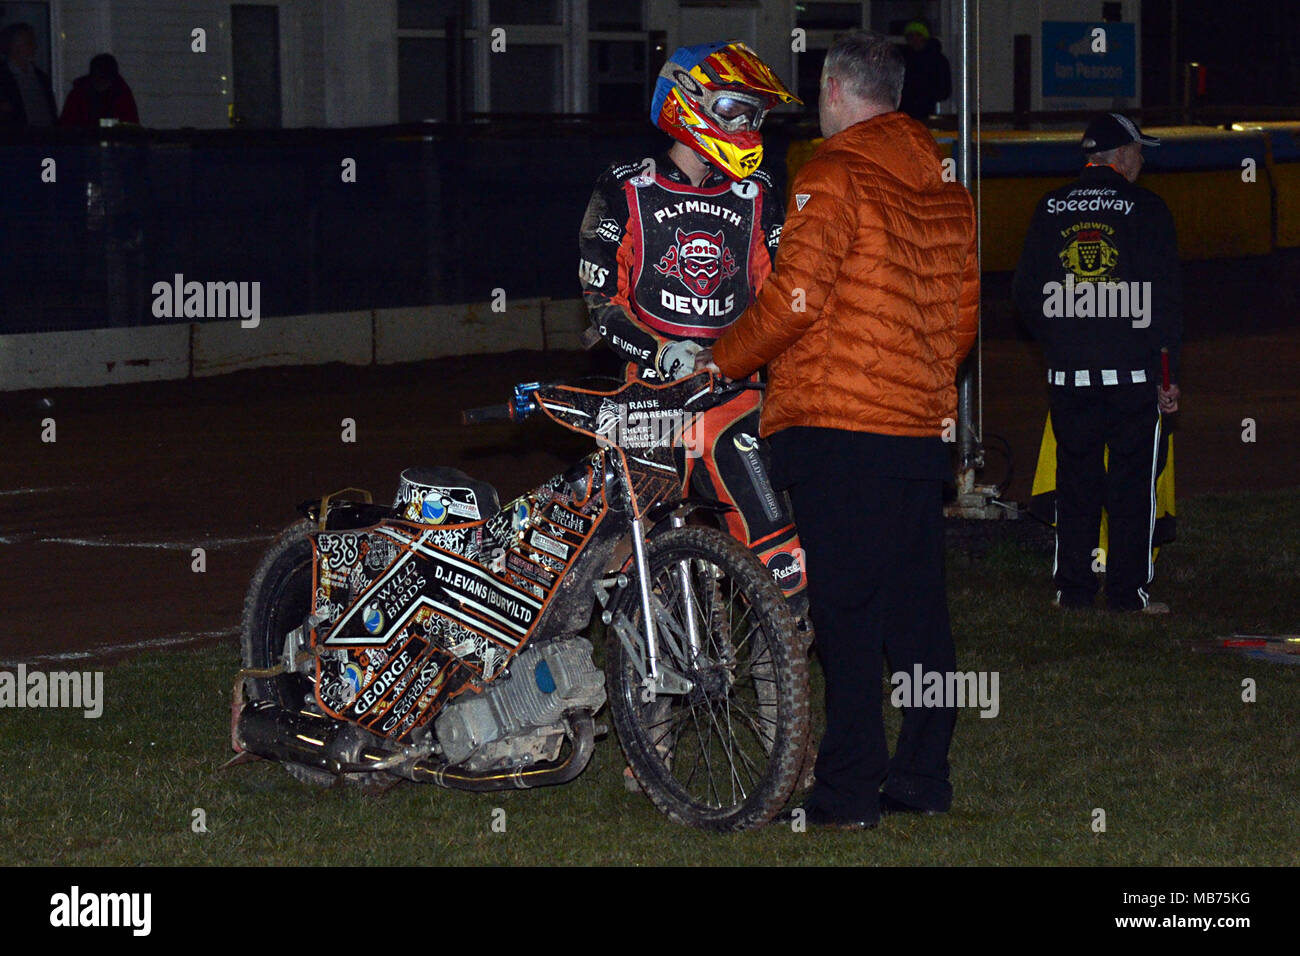 Plymouth, UK. 6th April, 2018. A frustrated Macauley Leek speaks with promotor Stuart Kellie after his bike fails on the line for the third attempt to start heat 12 of the National Trophy meeting against the Kent Kings. Nick Truscott Photography Ltd Credit: Nicholas Truscott/Alamy Live News Stock Photo